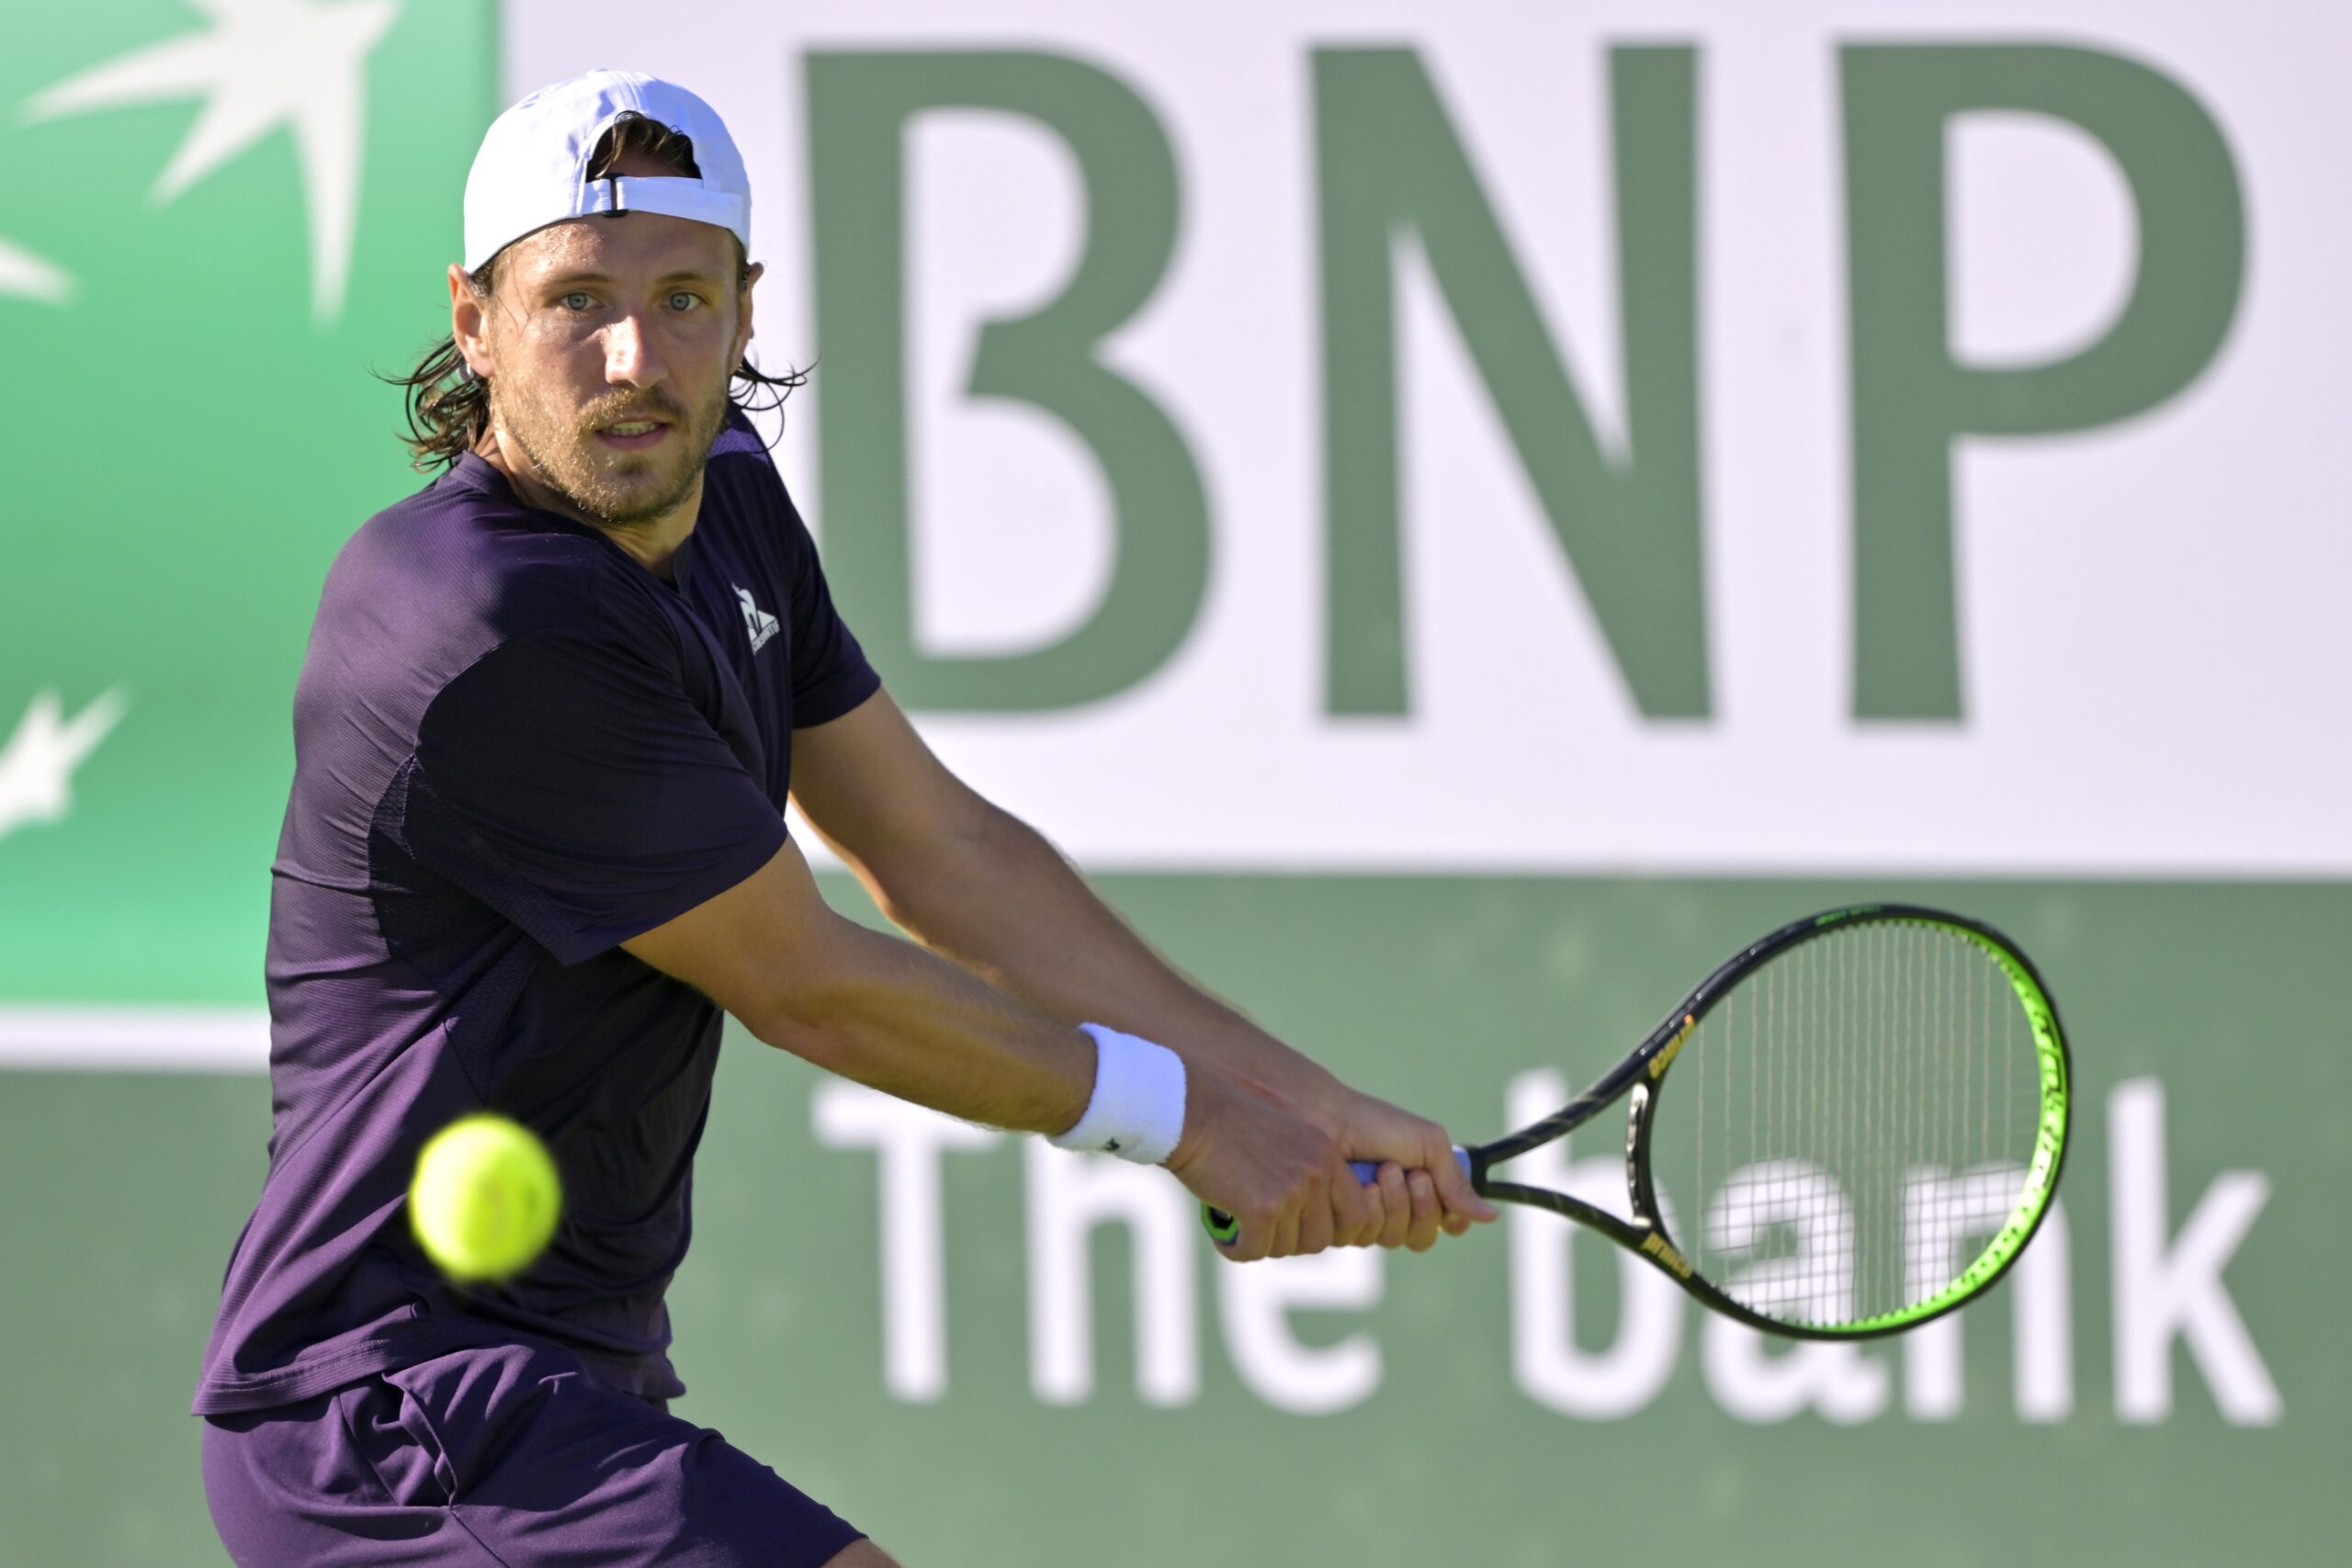 Challenger Tour Weekly Recap: Pouille and Vesely Back in the Winners' Circle